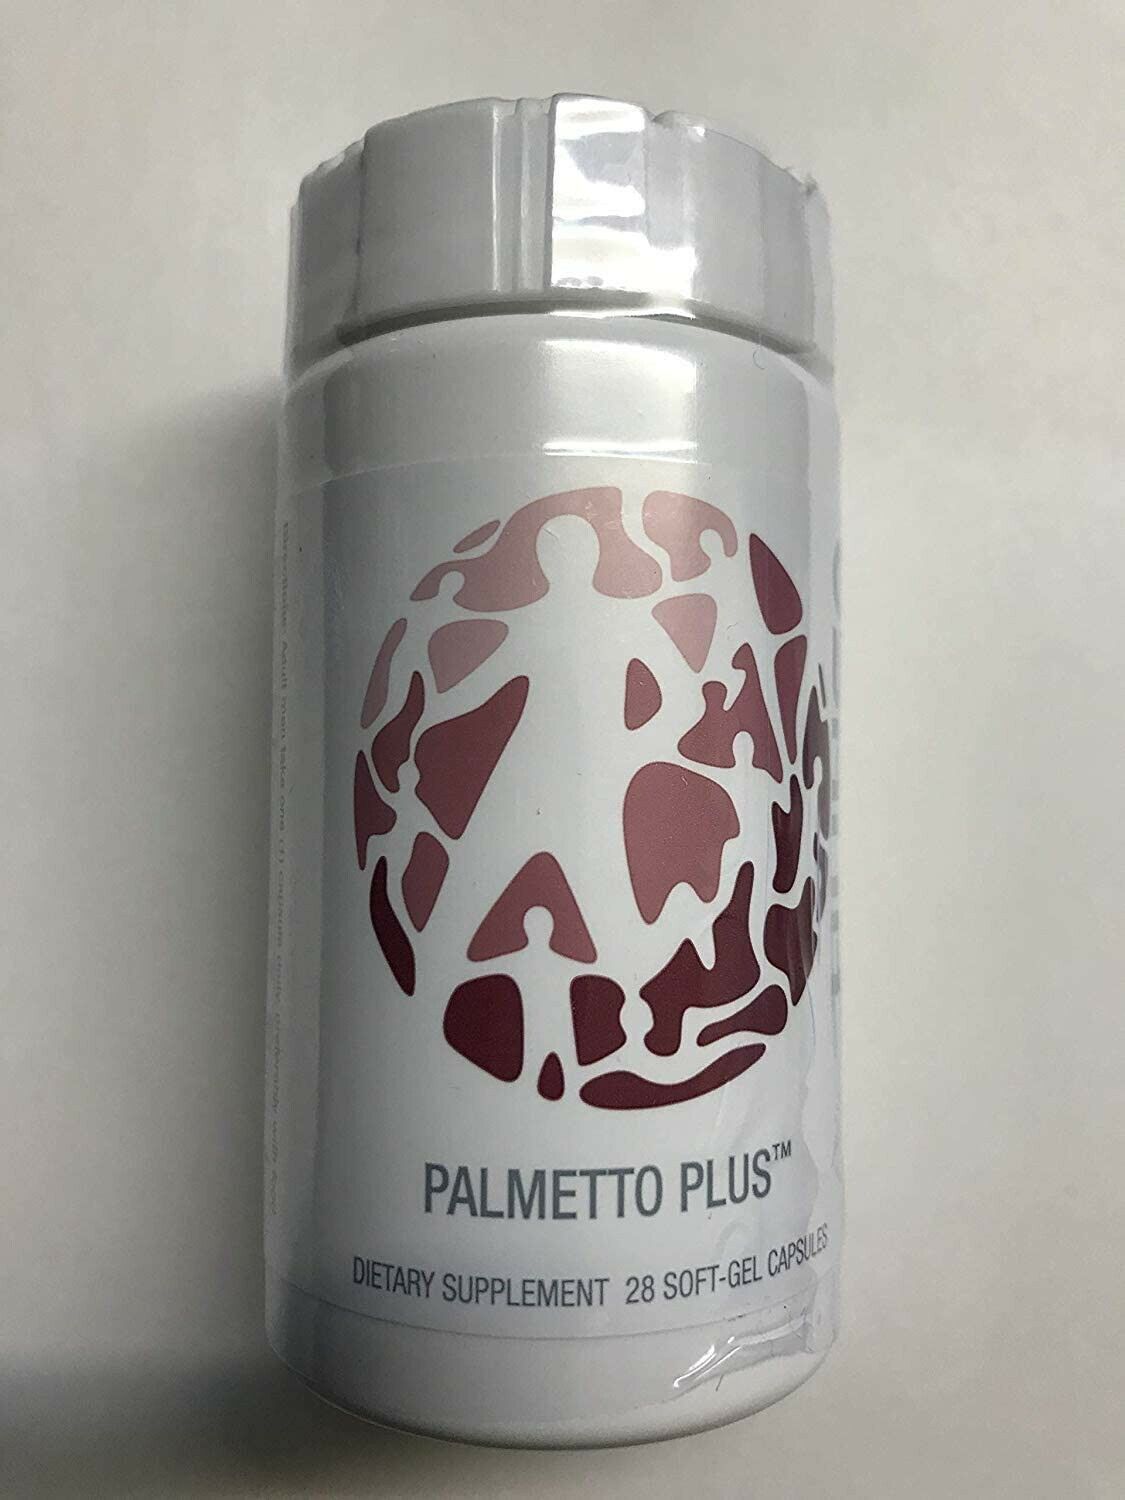 USANA Palmetto Plus Supplement for Men Supports Prostate and Cardio Health NEW